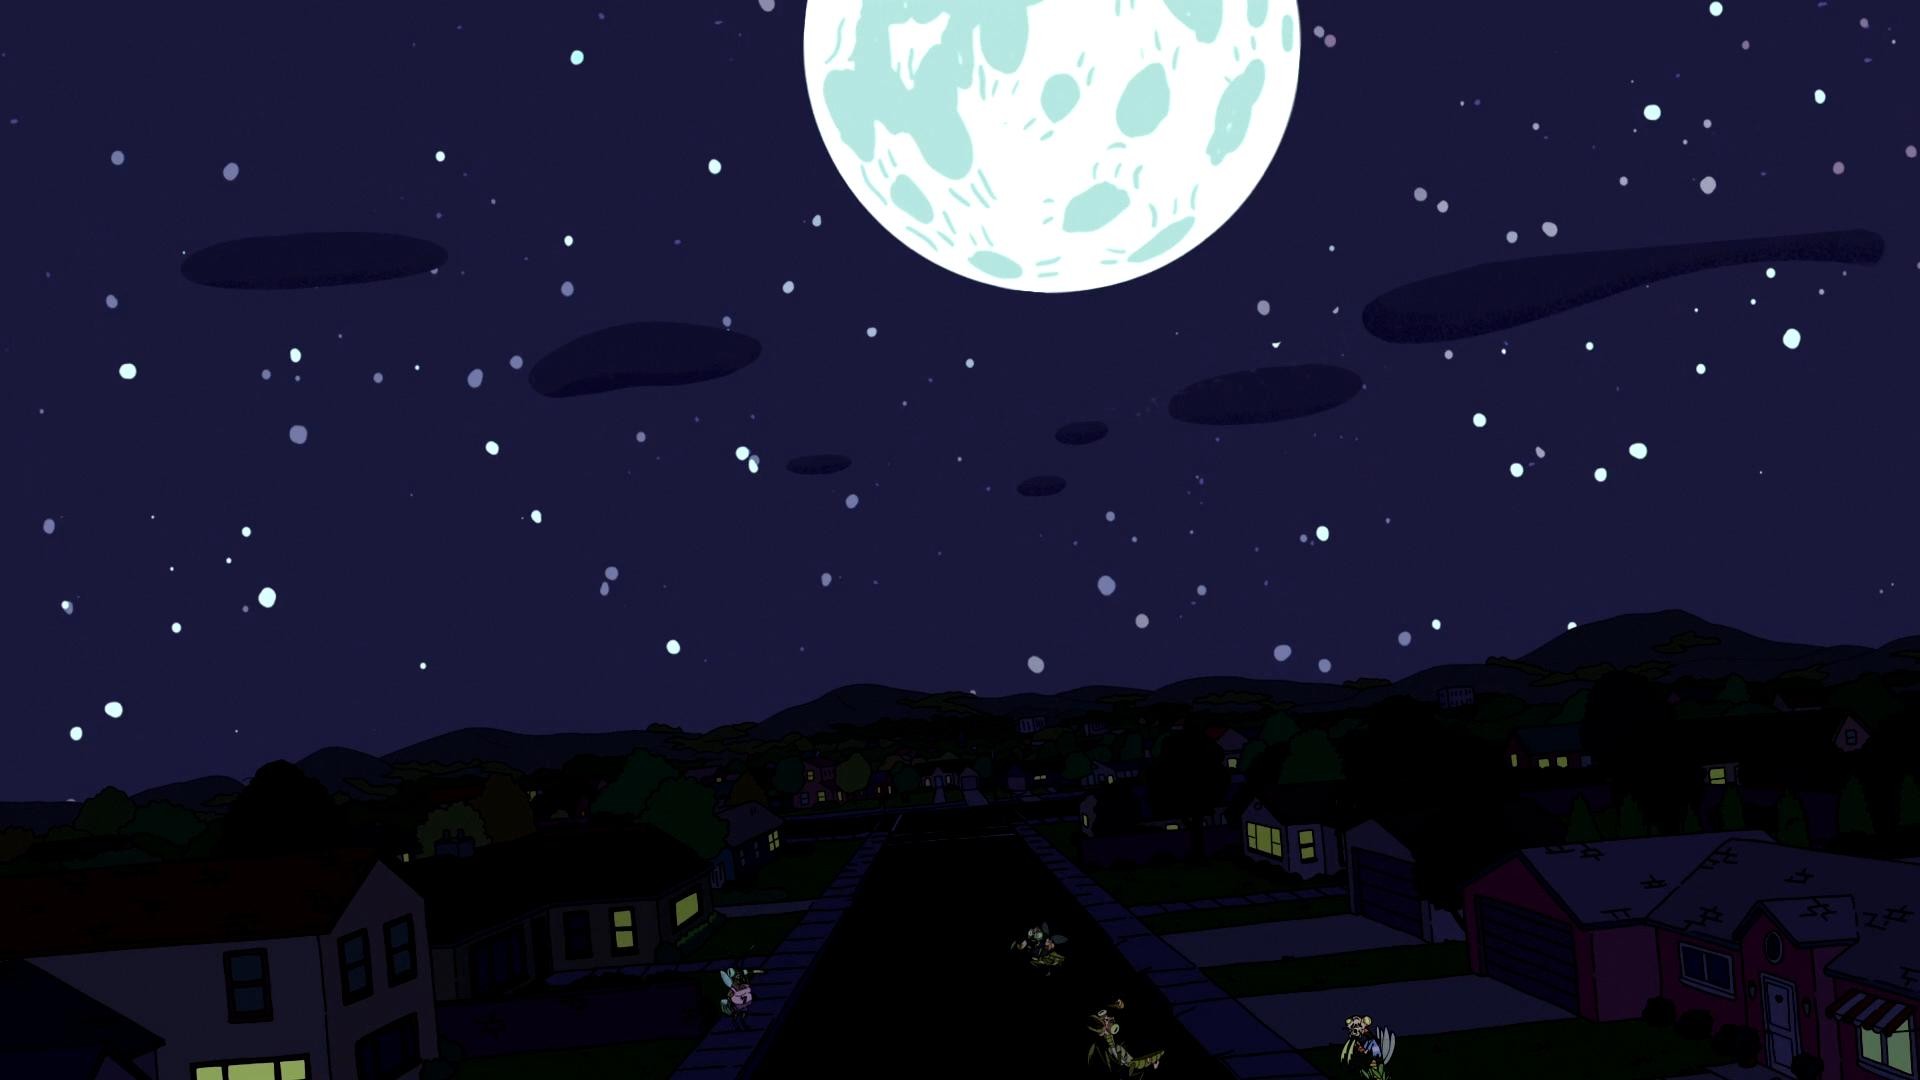 Computer Wallpapers Rick Morty with image resolution 1920x1080 pixel. You can use this wallpaper as background for your desktop Computer Screensavers, Android or iPhone smartphones